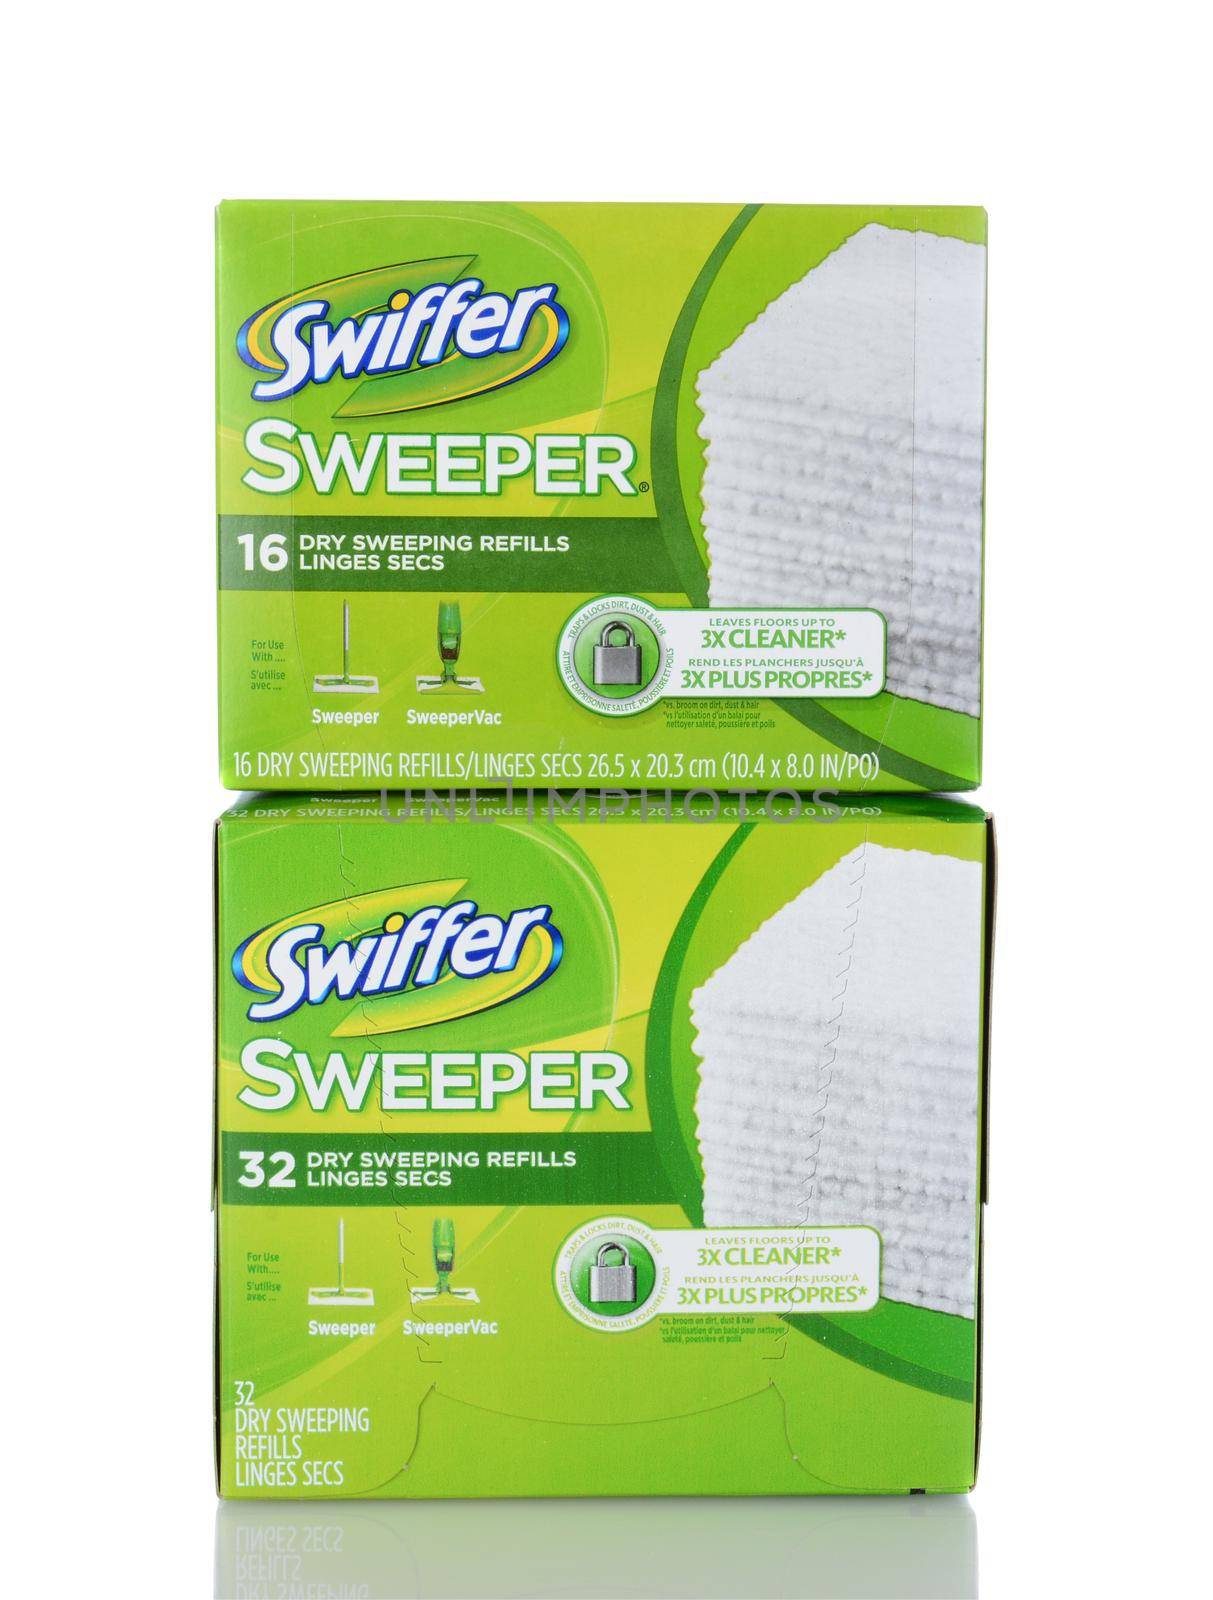 IRVINE, CA - January 05, 2014: Two boxes of Swiffer Dry Sweeping Refills. Swiffer is a line of cleaning products by Procter & Gamble and Michael Rand, introduced in 1999.